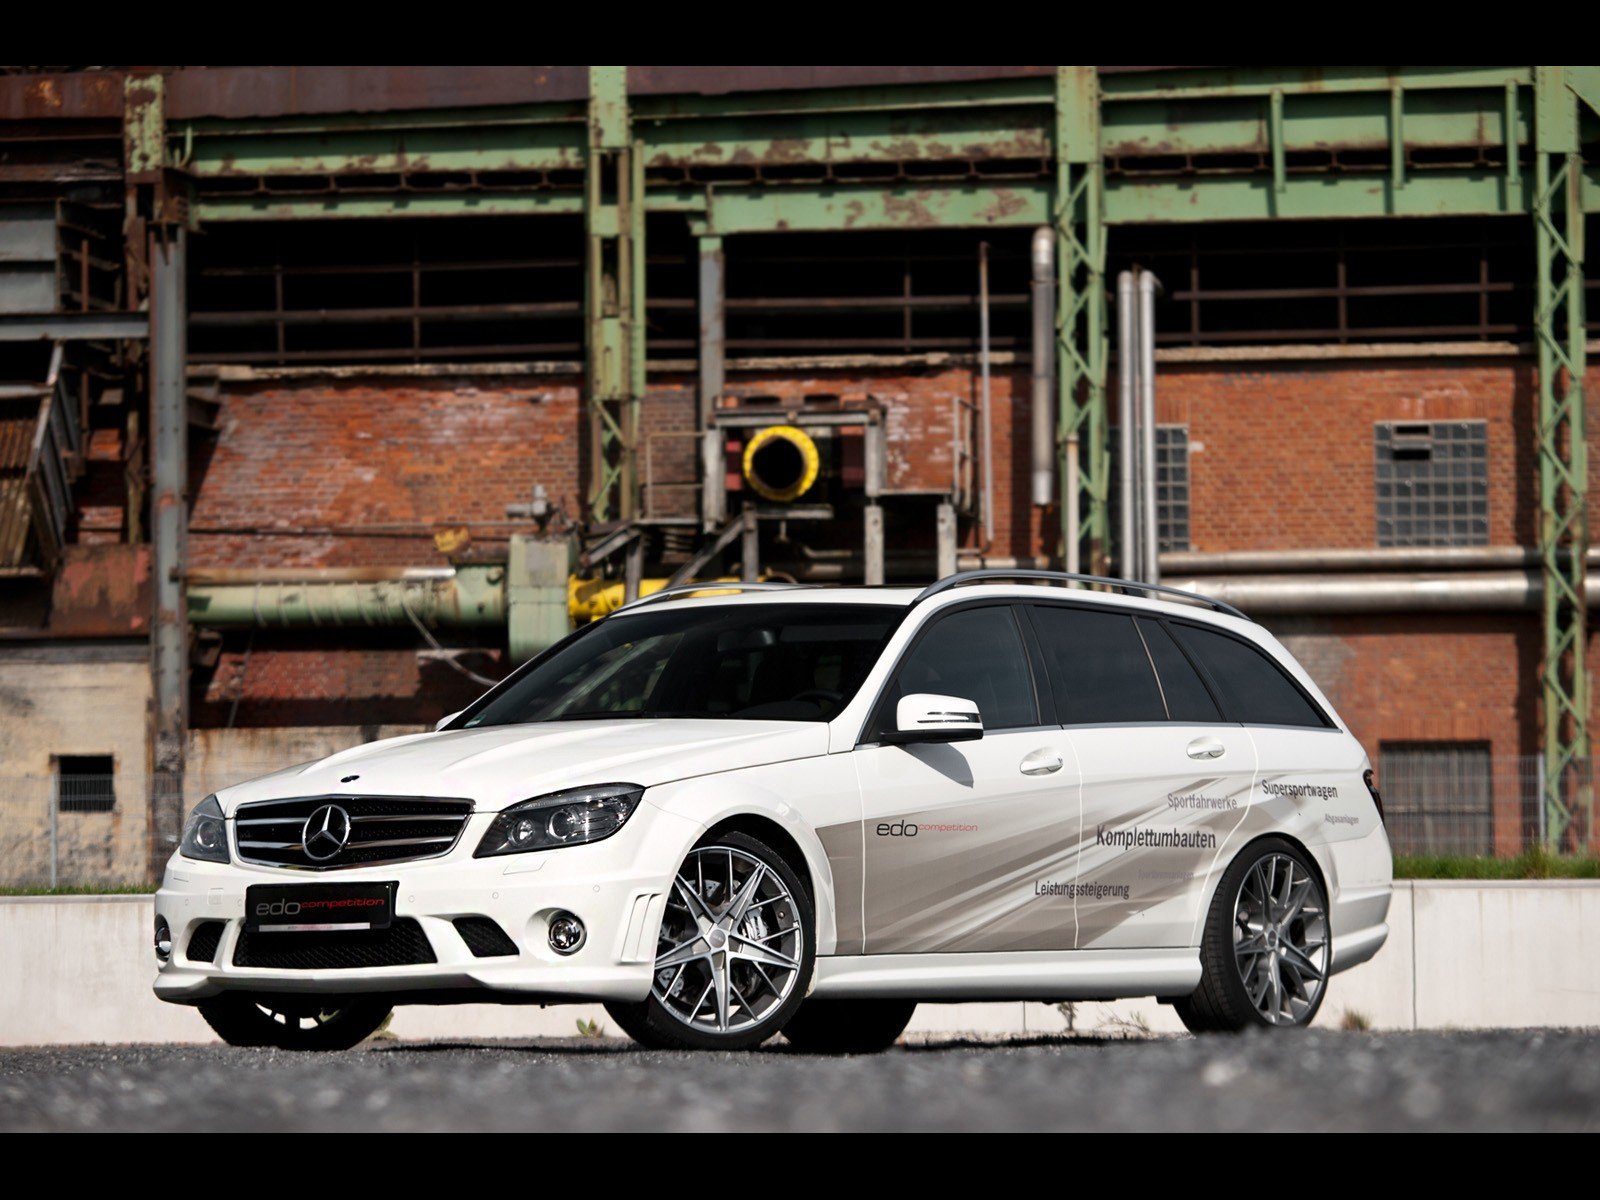 amg, Static, Edo, Competition, Mercedes benz, C, 63 Wallpaper